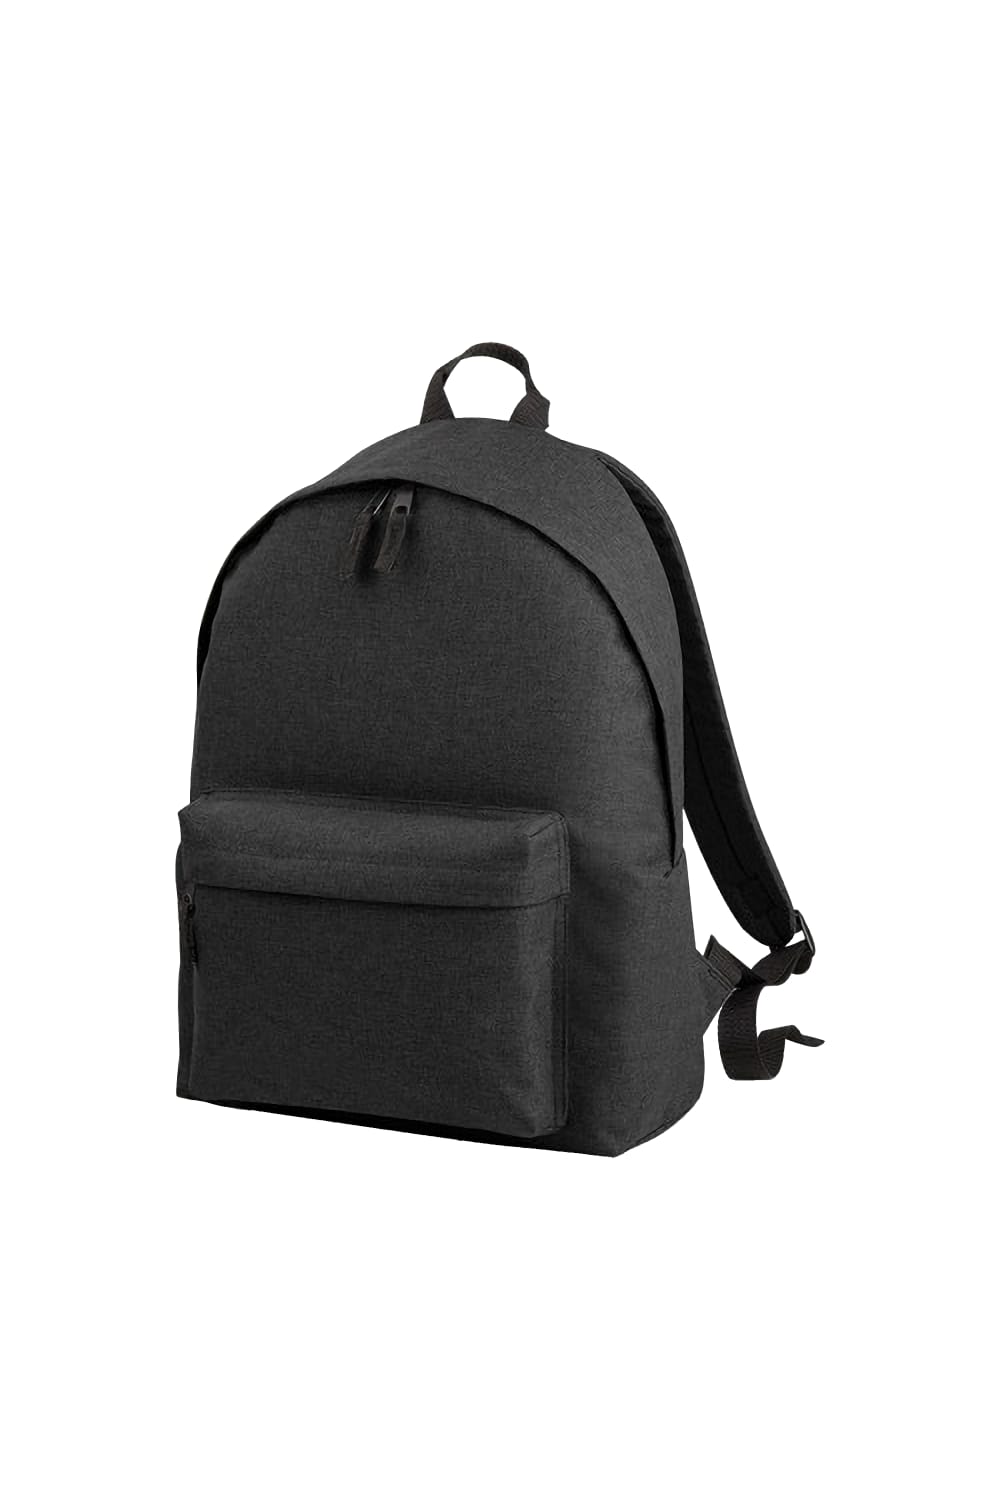 Two Tone Fashion Backpack/Rucksack/Bag,18 Liters - Anthracite